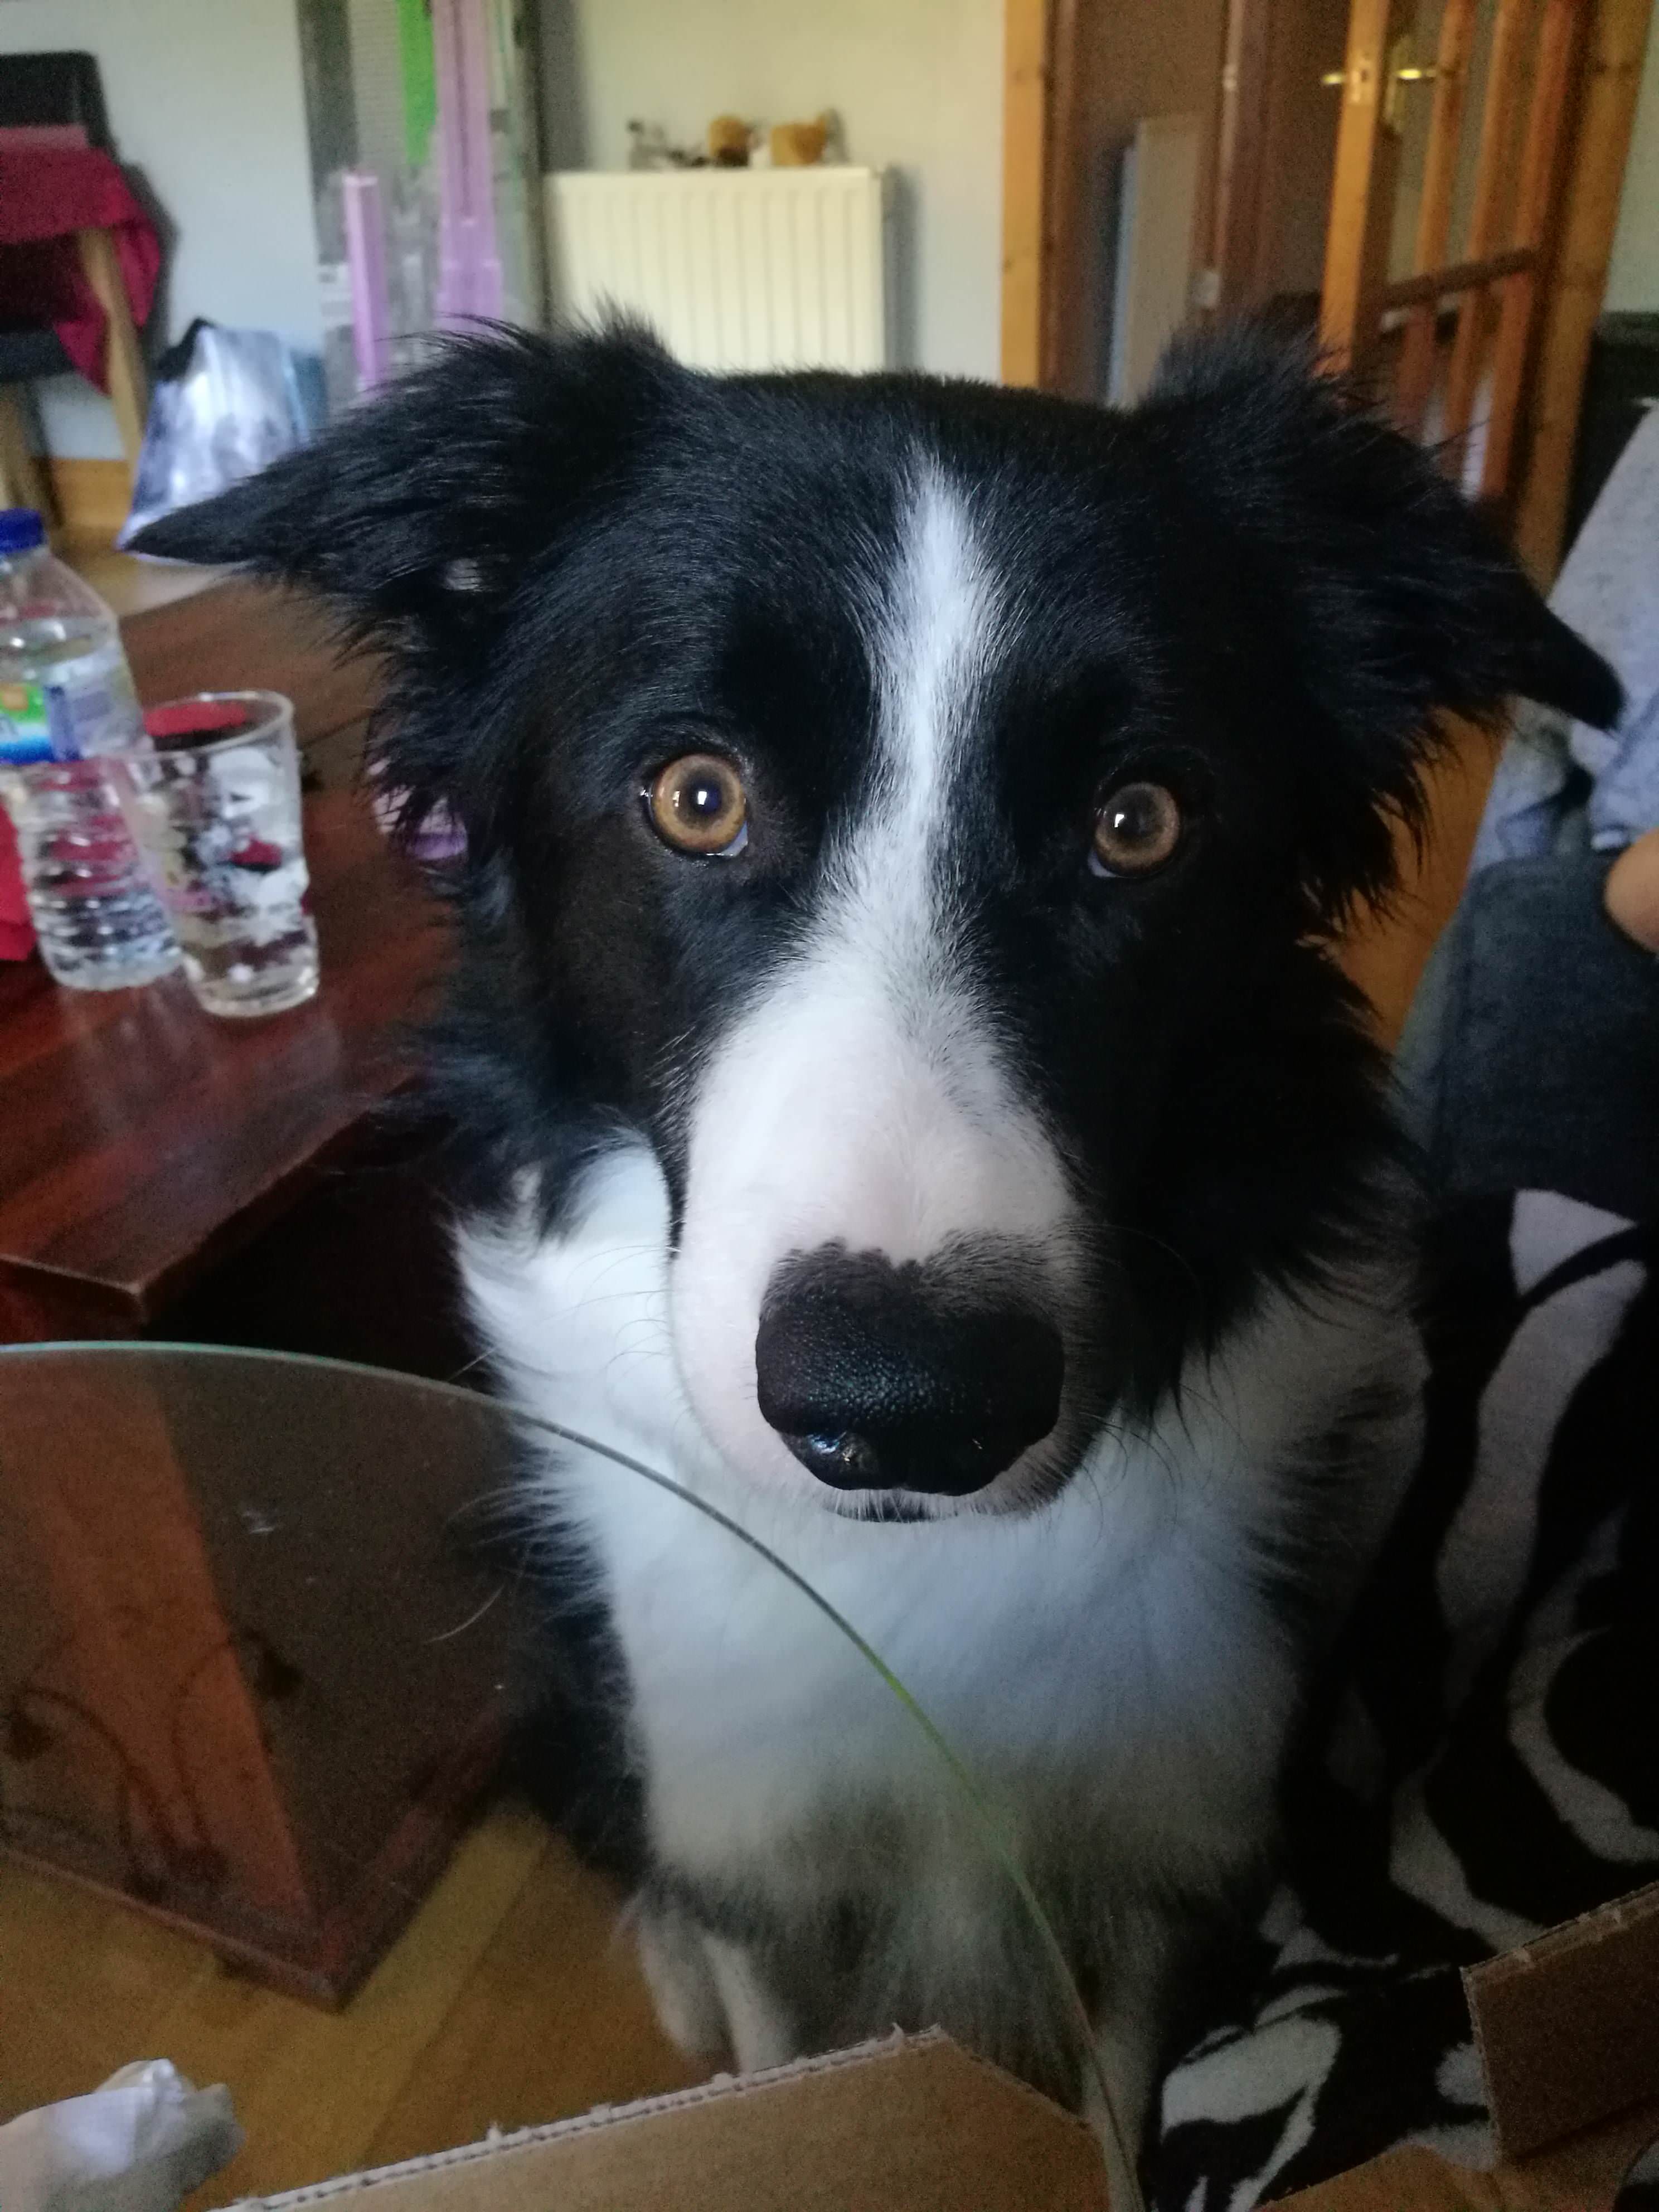 Border Collie sitting in the floor behind the glass table with its begging face